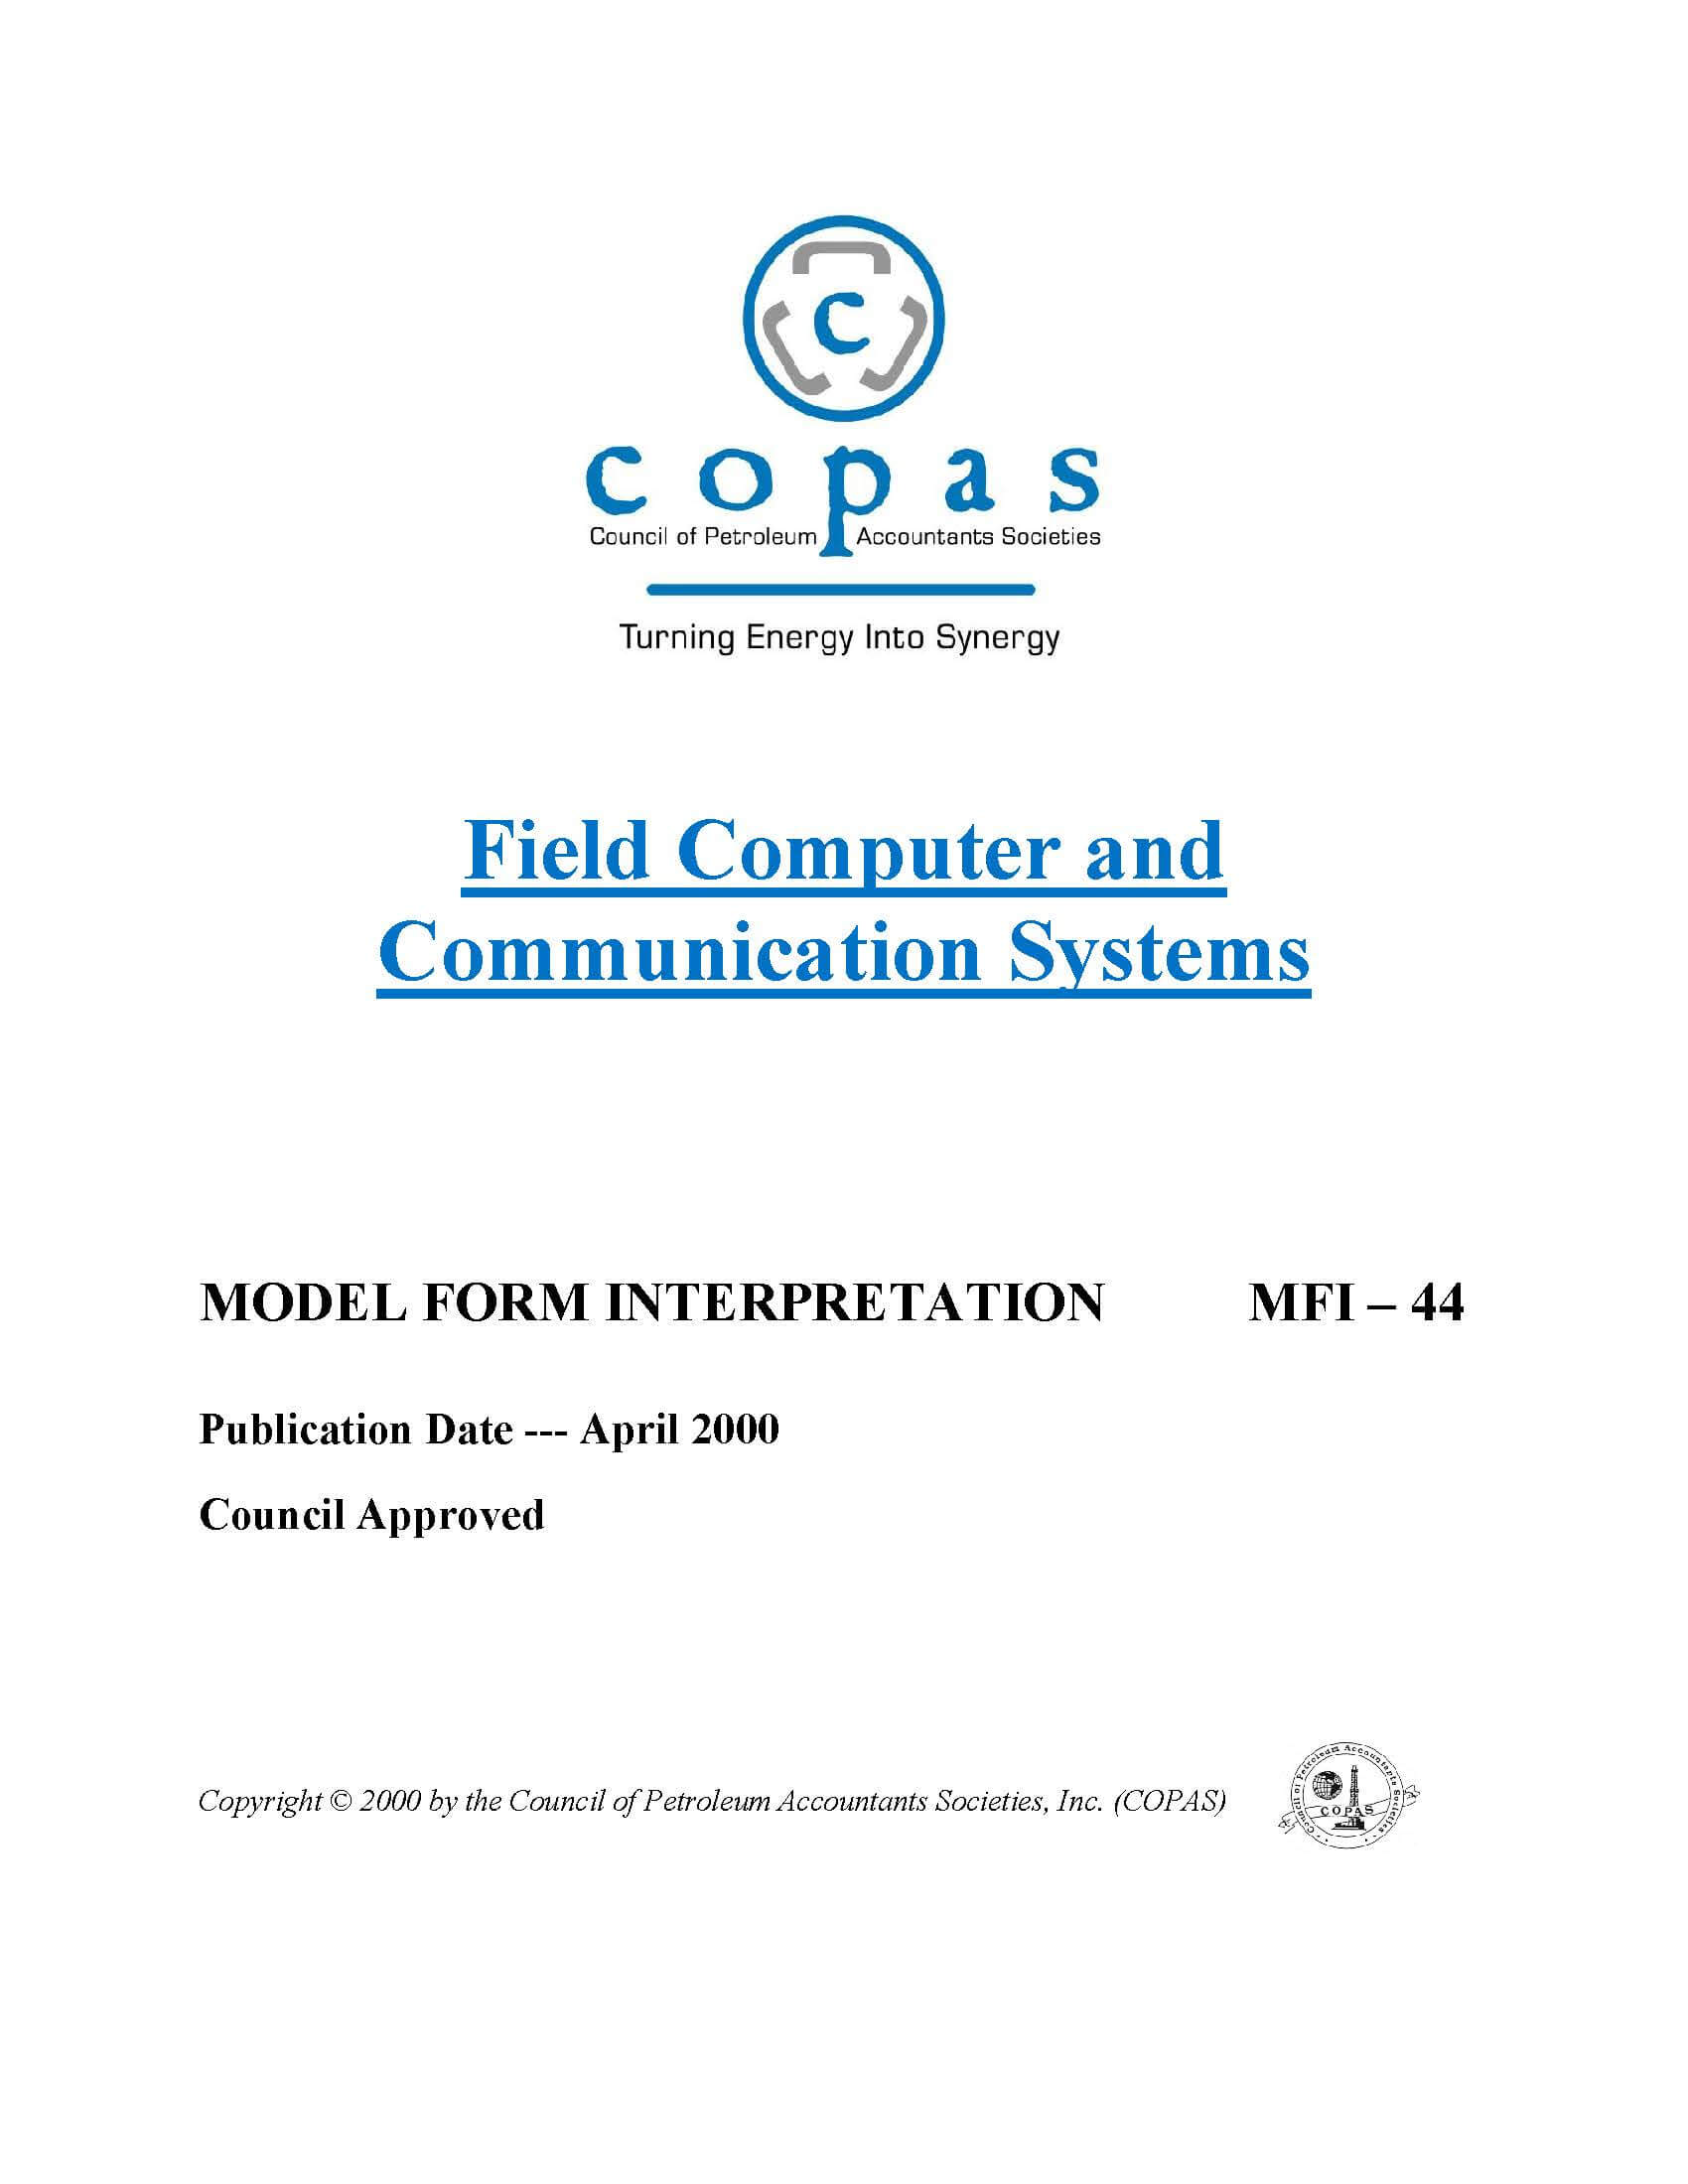 MFI-44 Field Computer and Communication Systems